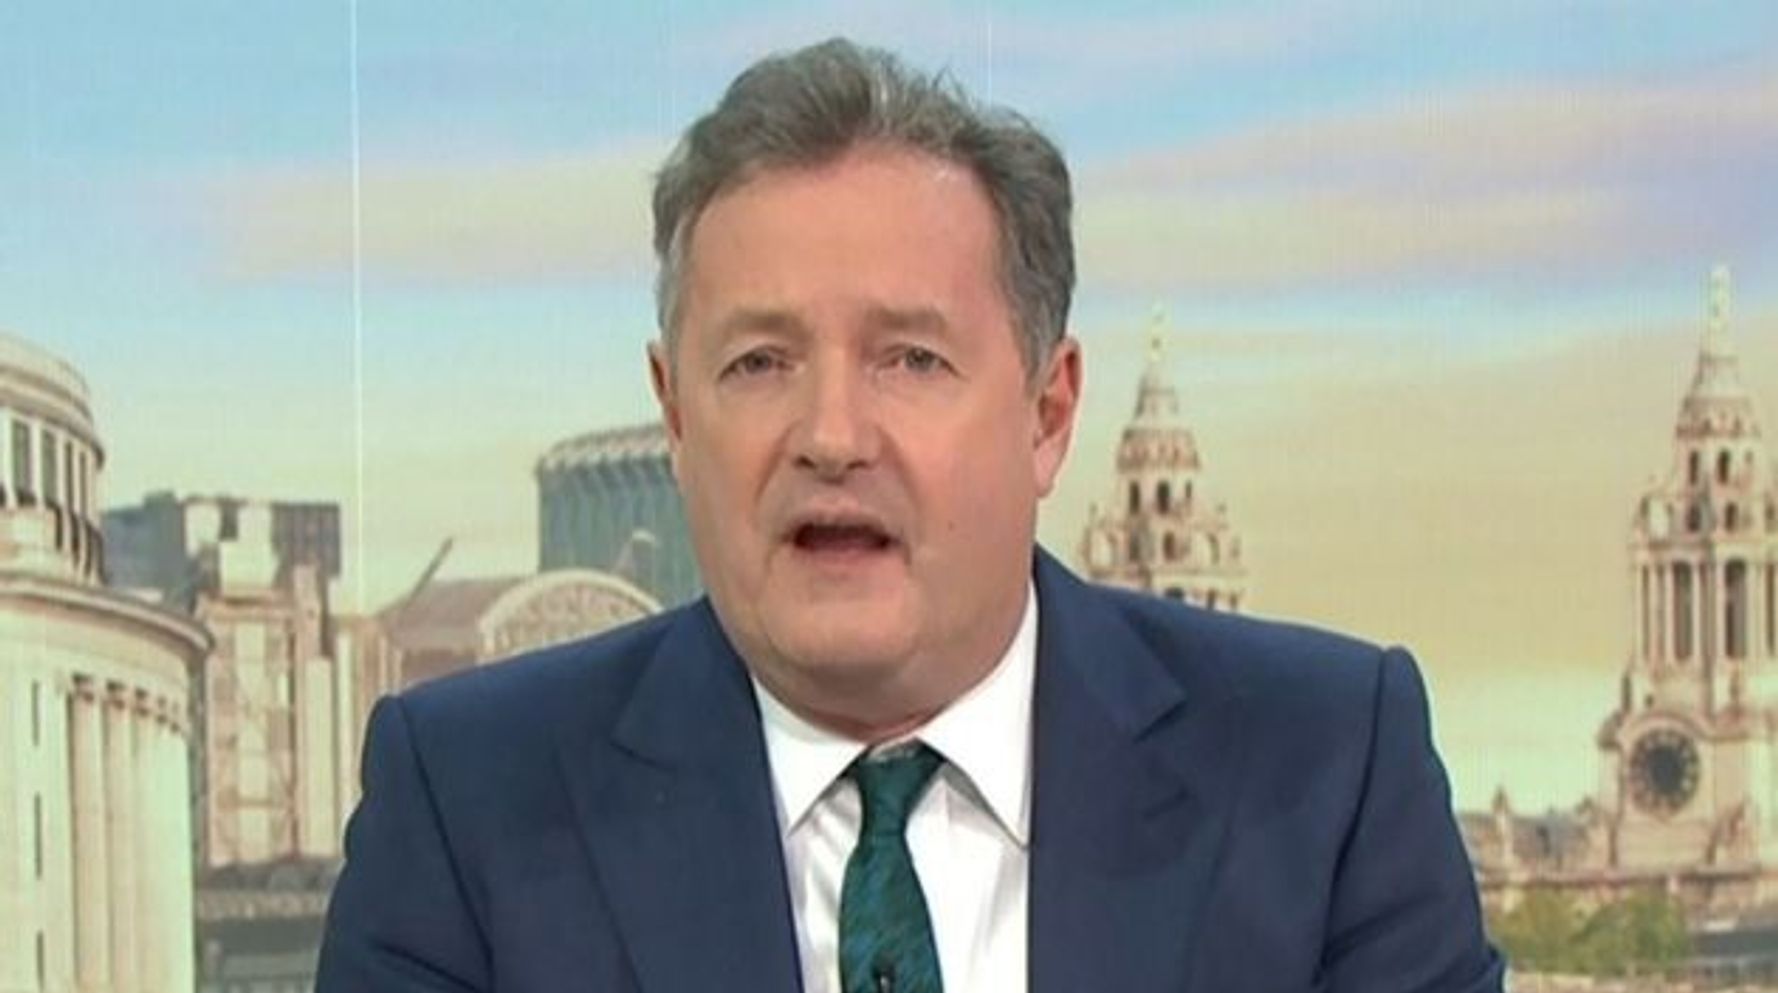 Piers Morgan leaves Good Morning Britain after controversial remarks by Meghan Markle